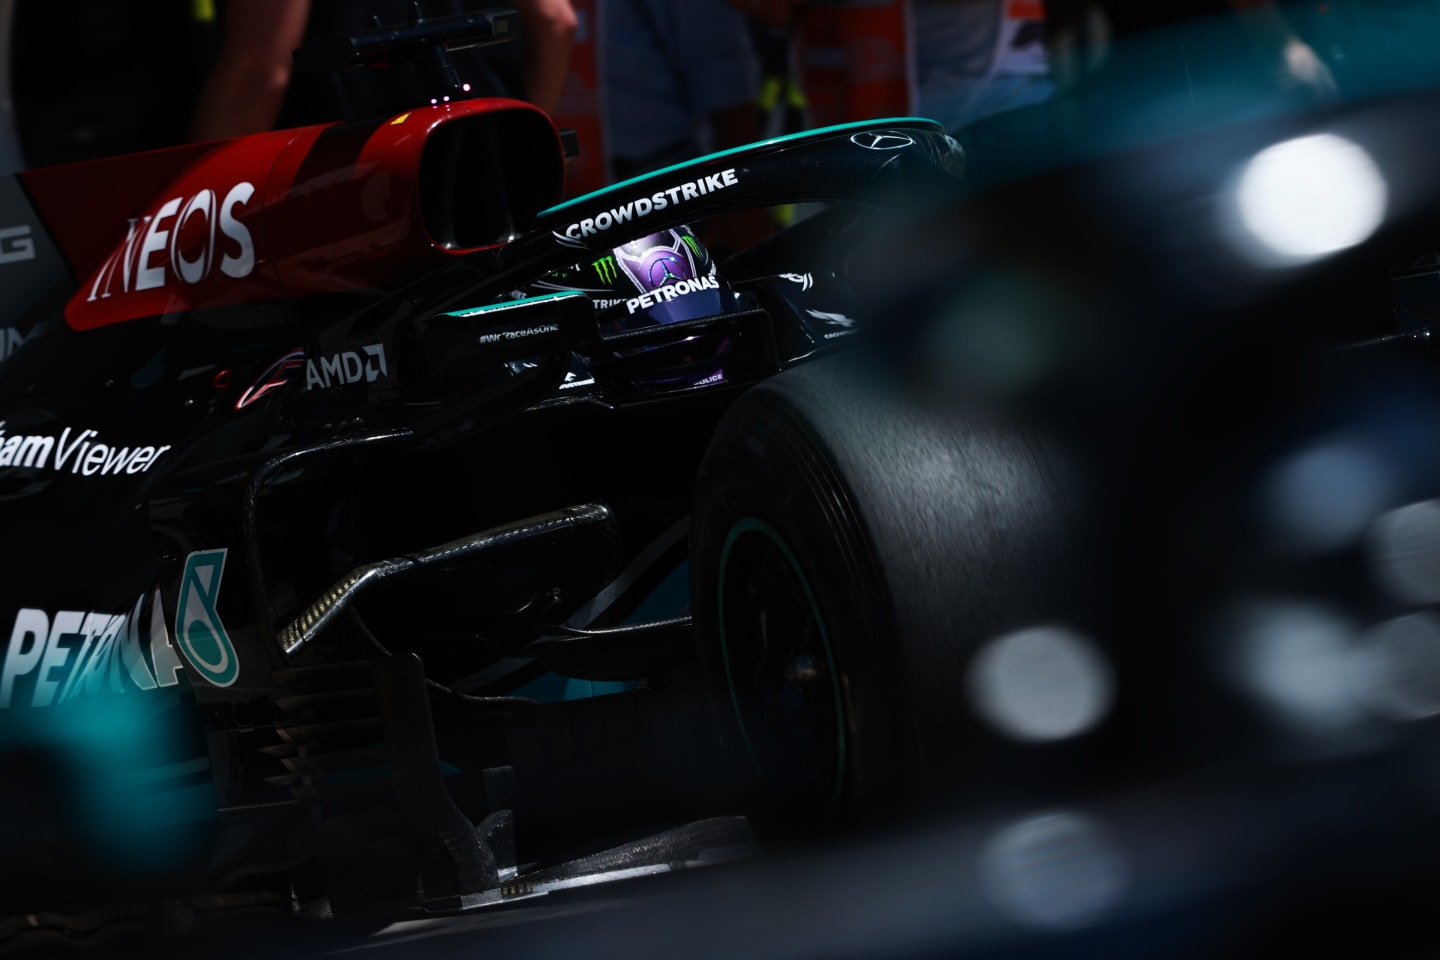 SPIELBERG, AUSTRIA - JULY 03: Lewis Hamilton of Great Britain driving the (44) Mercedes AMG Petronas F1 Team Mercedes W12 leaves the garage during final practice ahead of the F1 Grand Prix of Austria at Red Bull Ring on July 03, 2021 in Spielberg, Austria. (Photo by Mark Thompson/Getty Images)